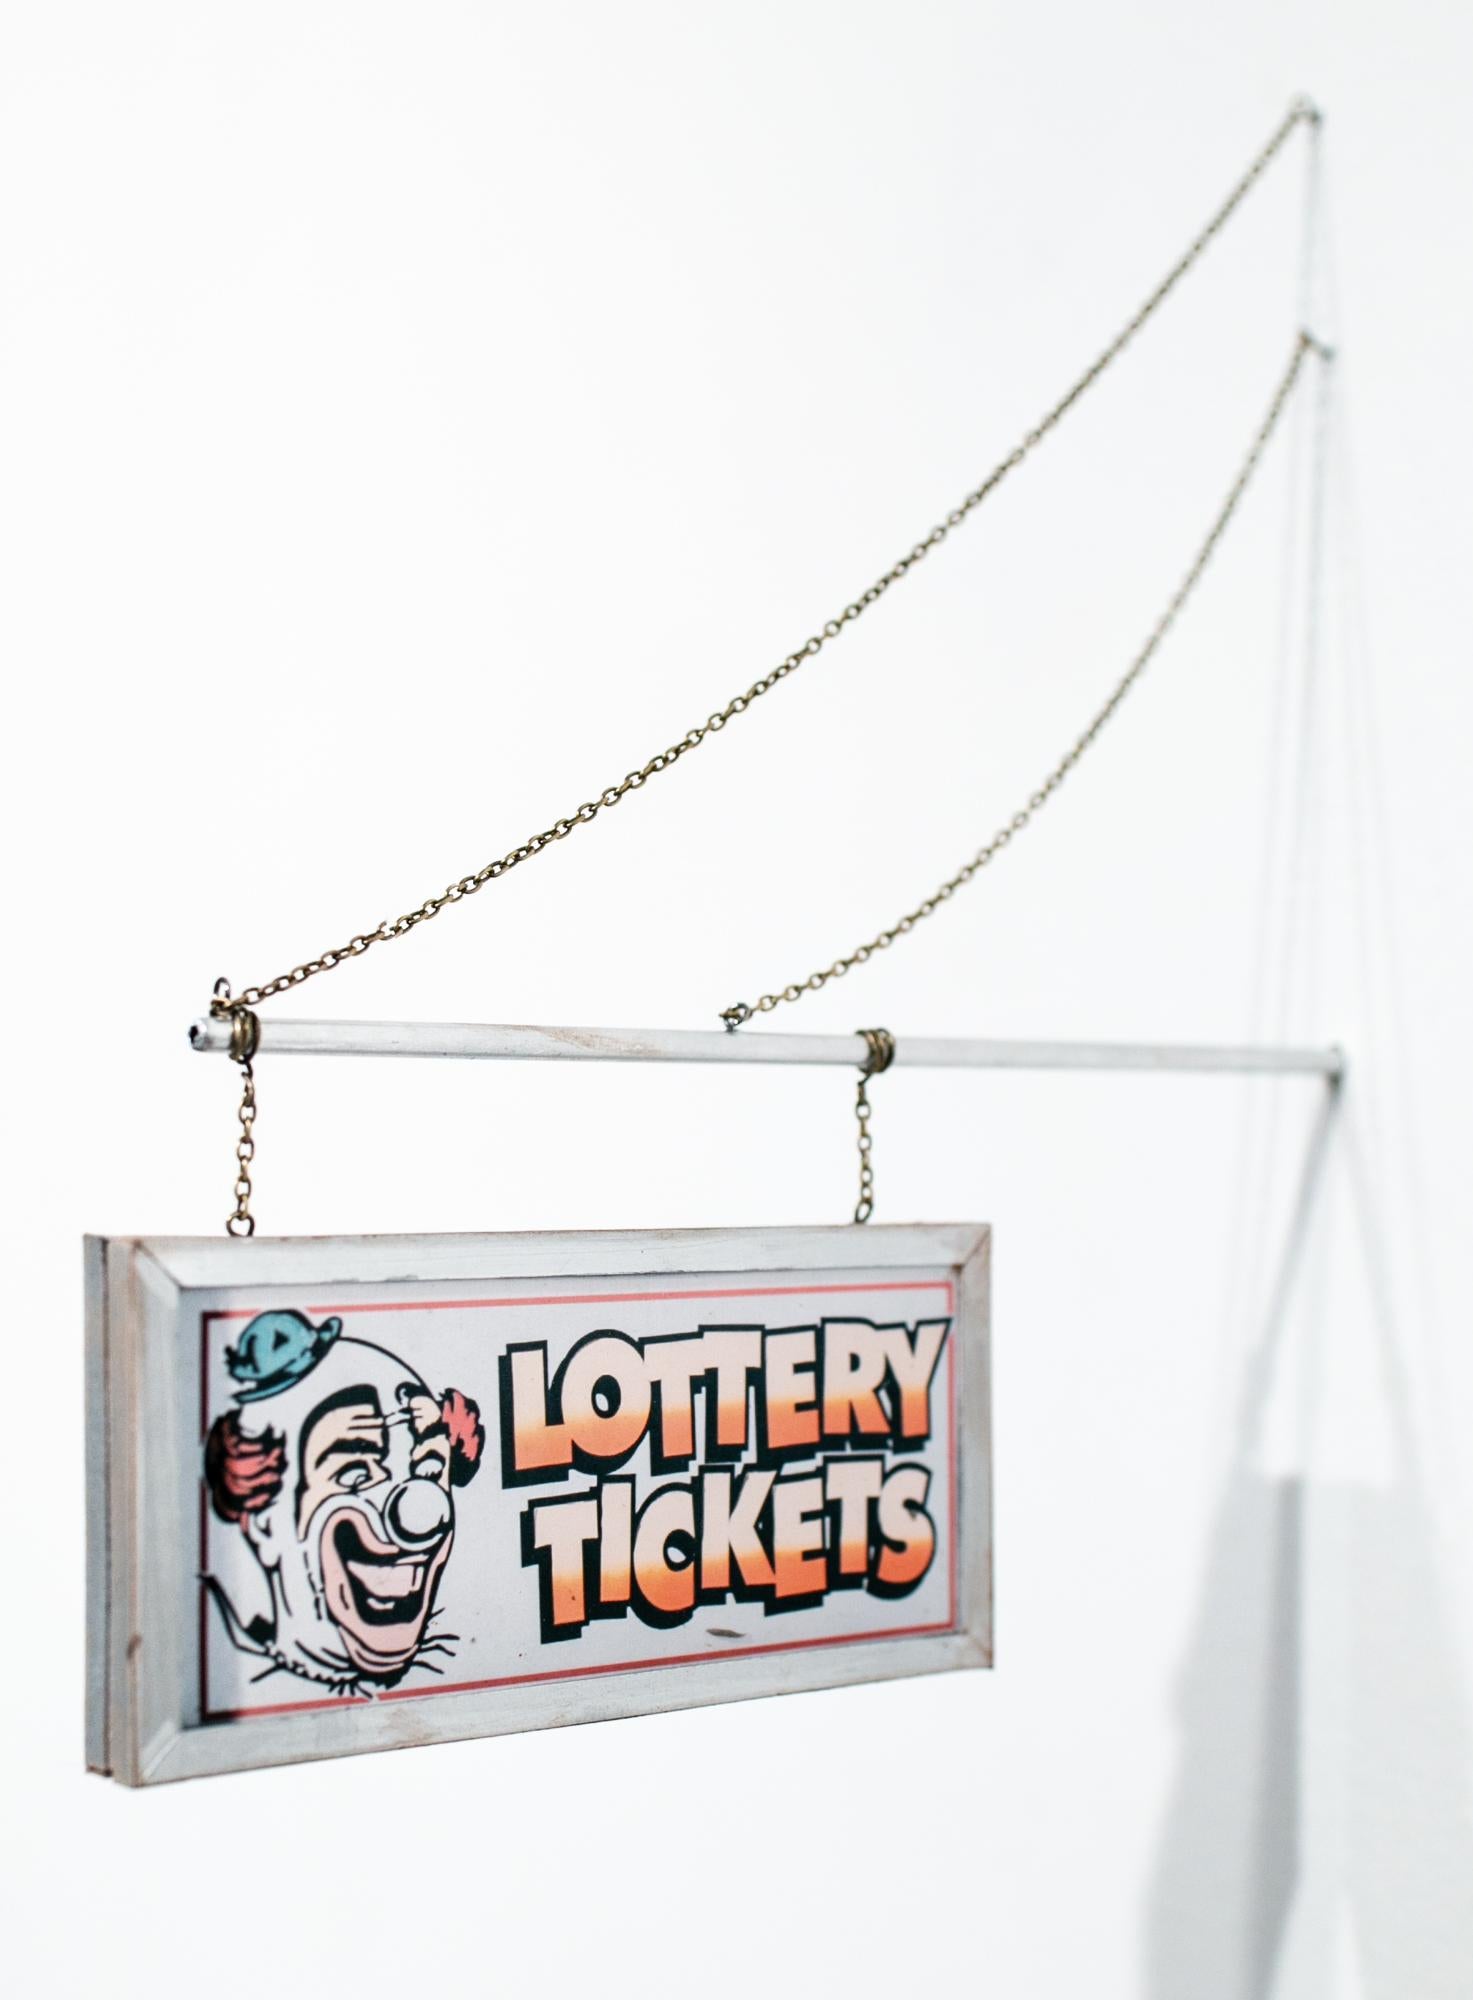 Pete's Lottery Tickets 1